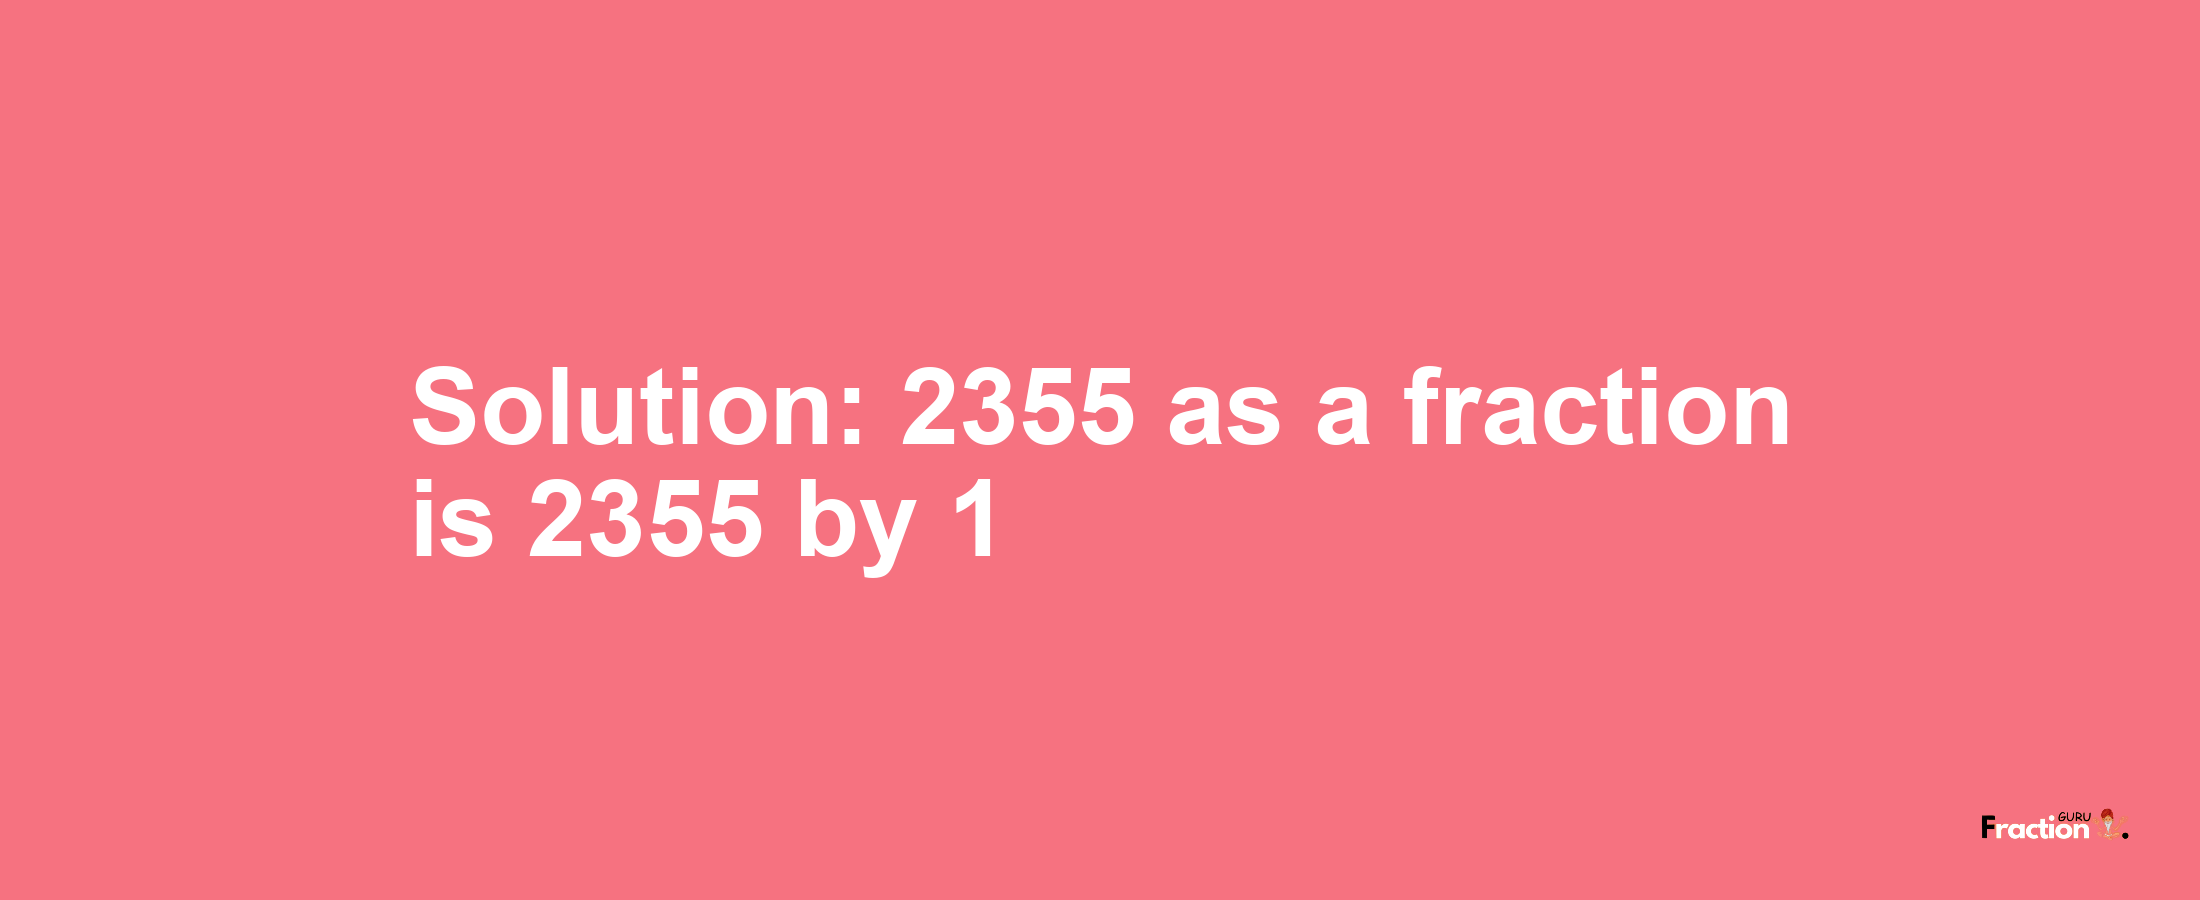 Solution:2355 as a fraction is 2355/1